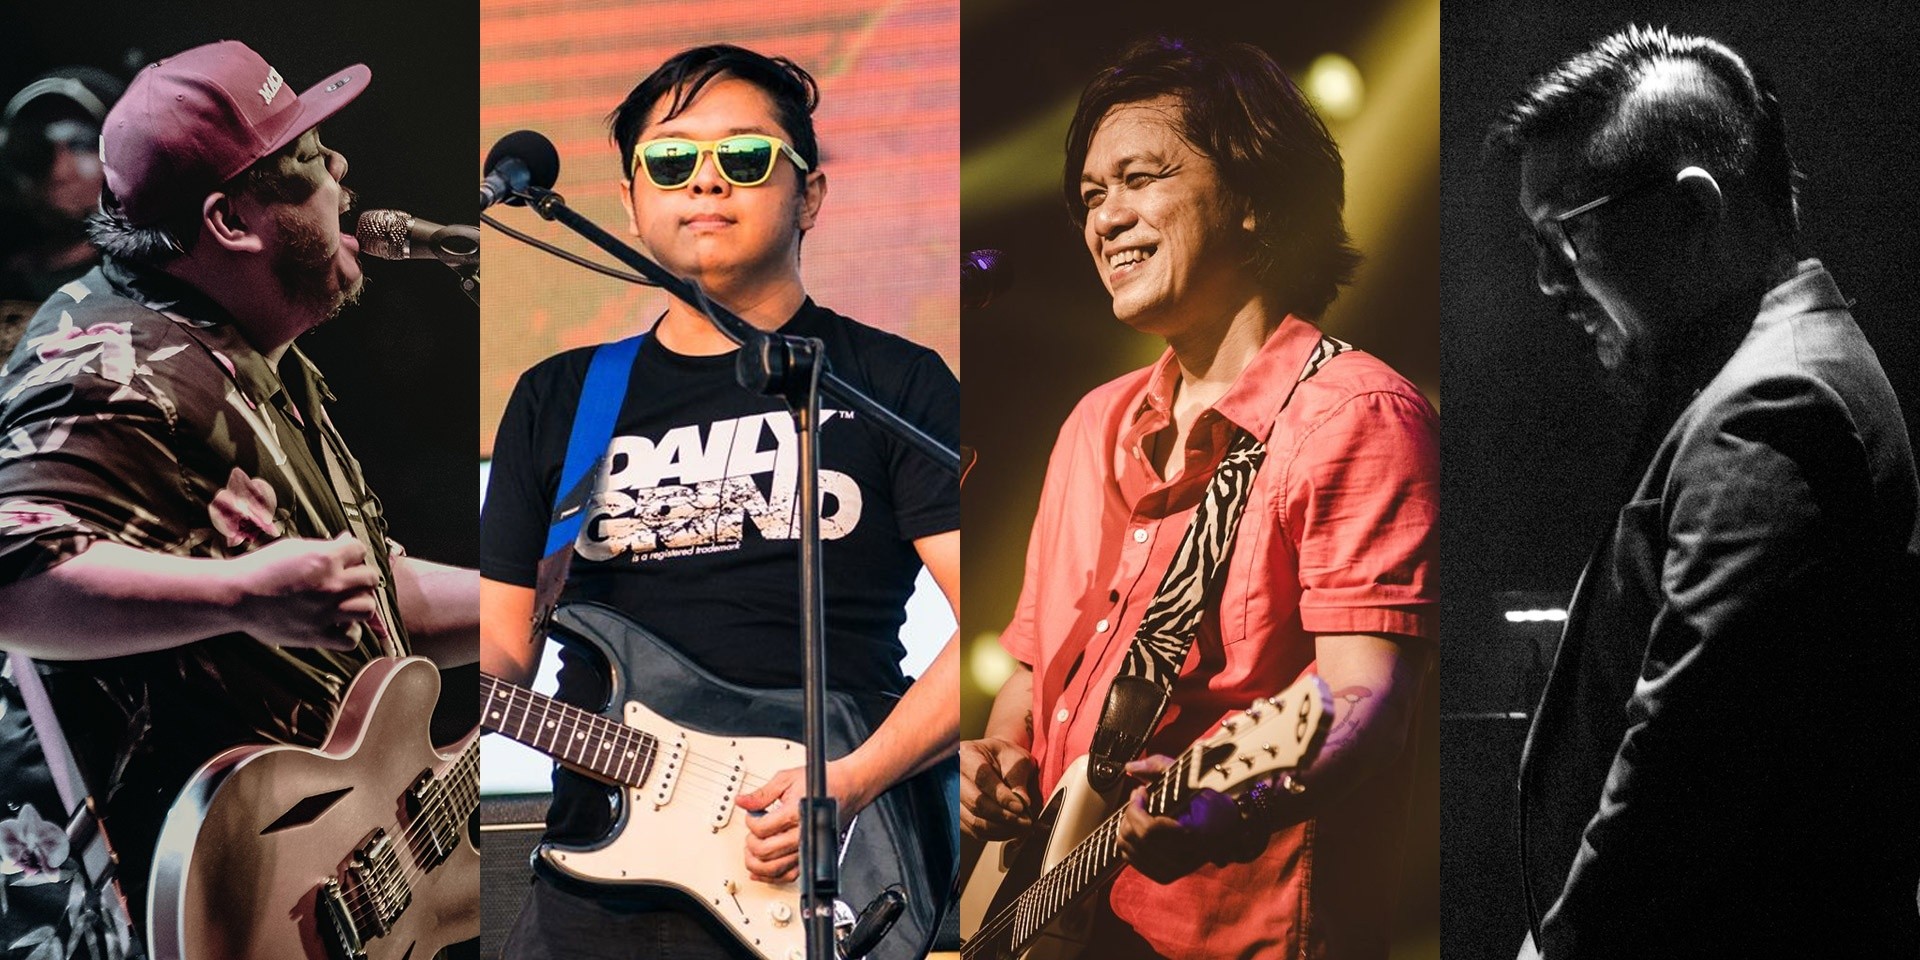 Musicians for Hire: Hale, The Itchyworms, Raymund Marasigan, and more offer lessons, music production, session work